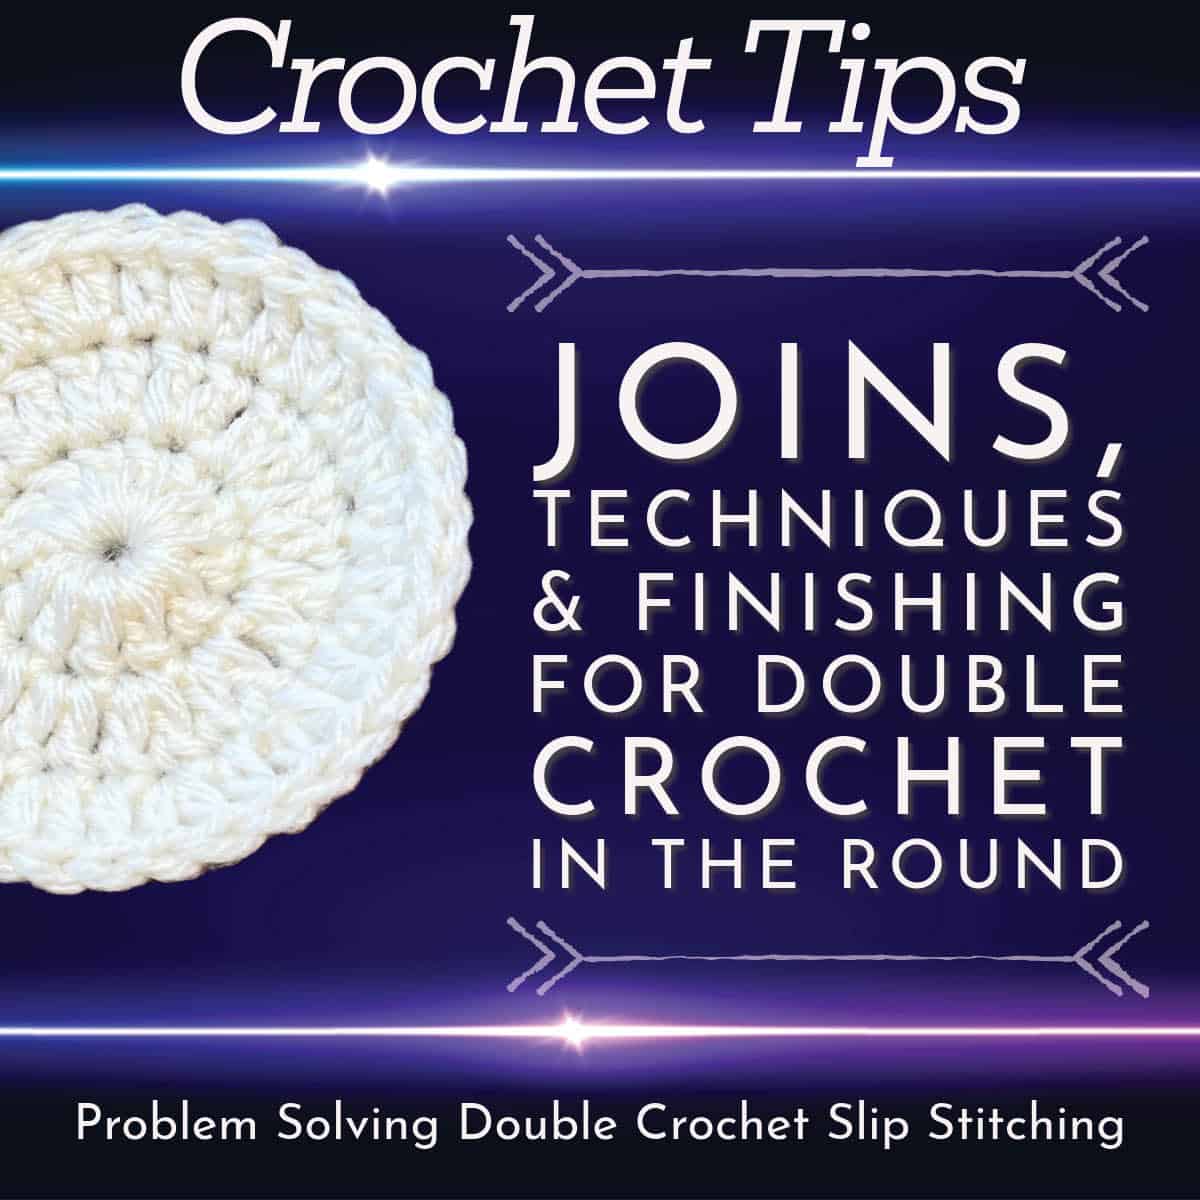 Crochet Tips for Double Crochet in the Round Joining and more